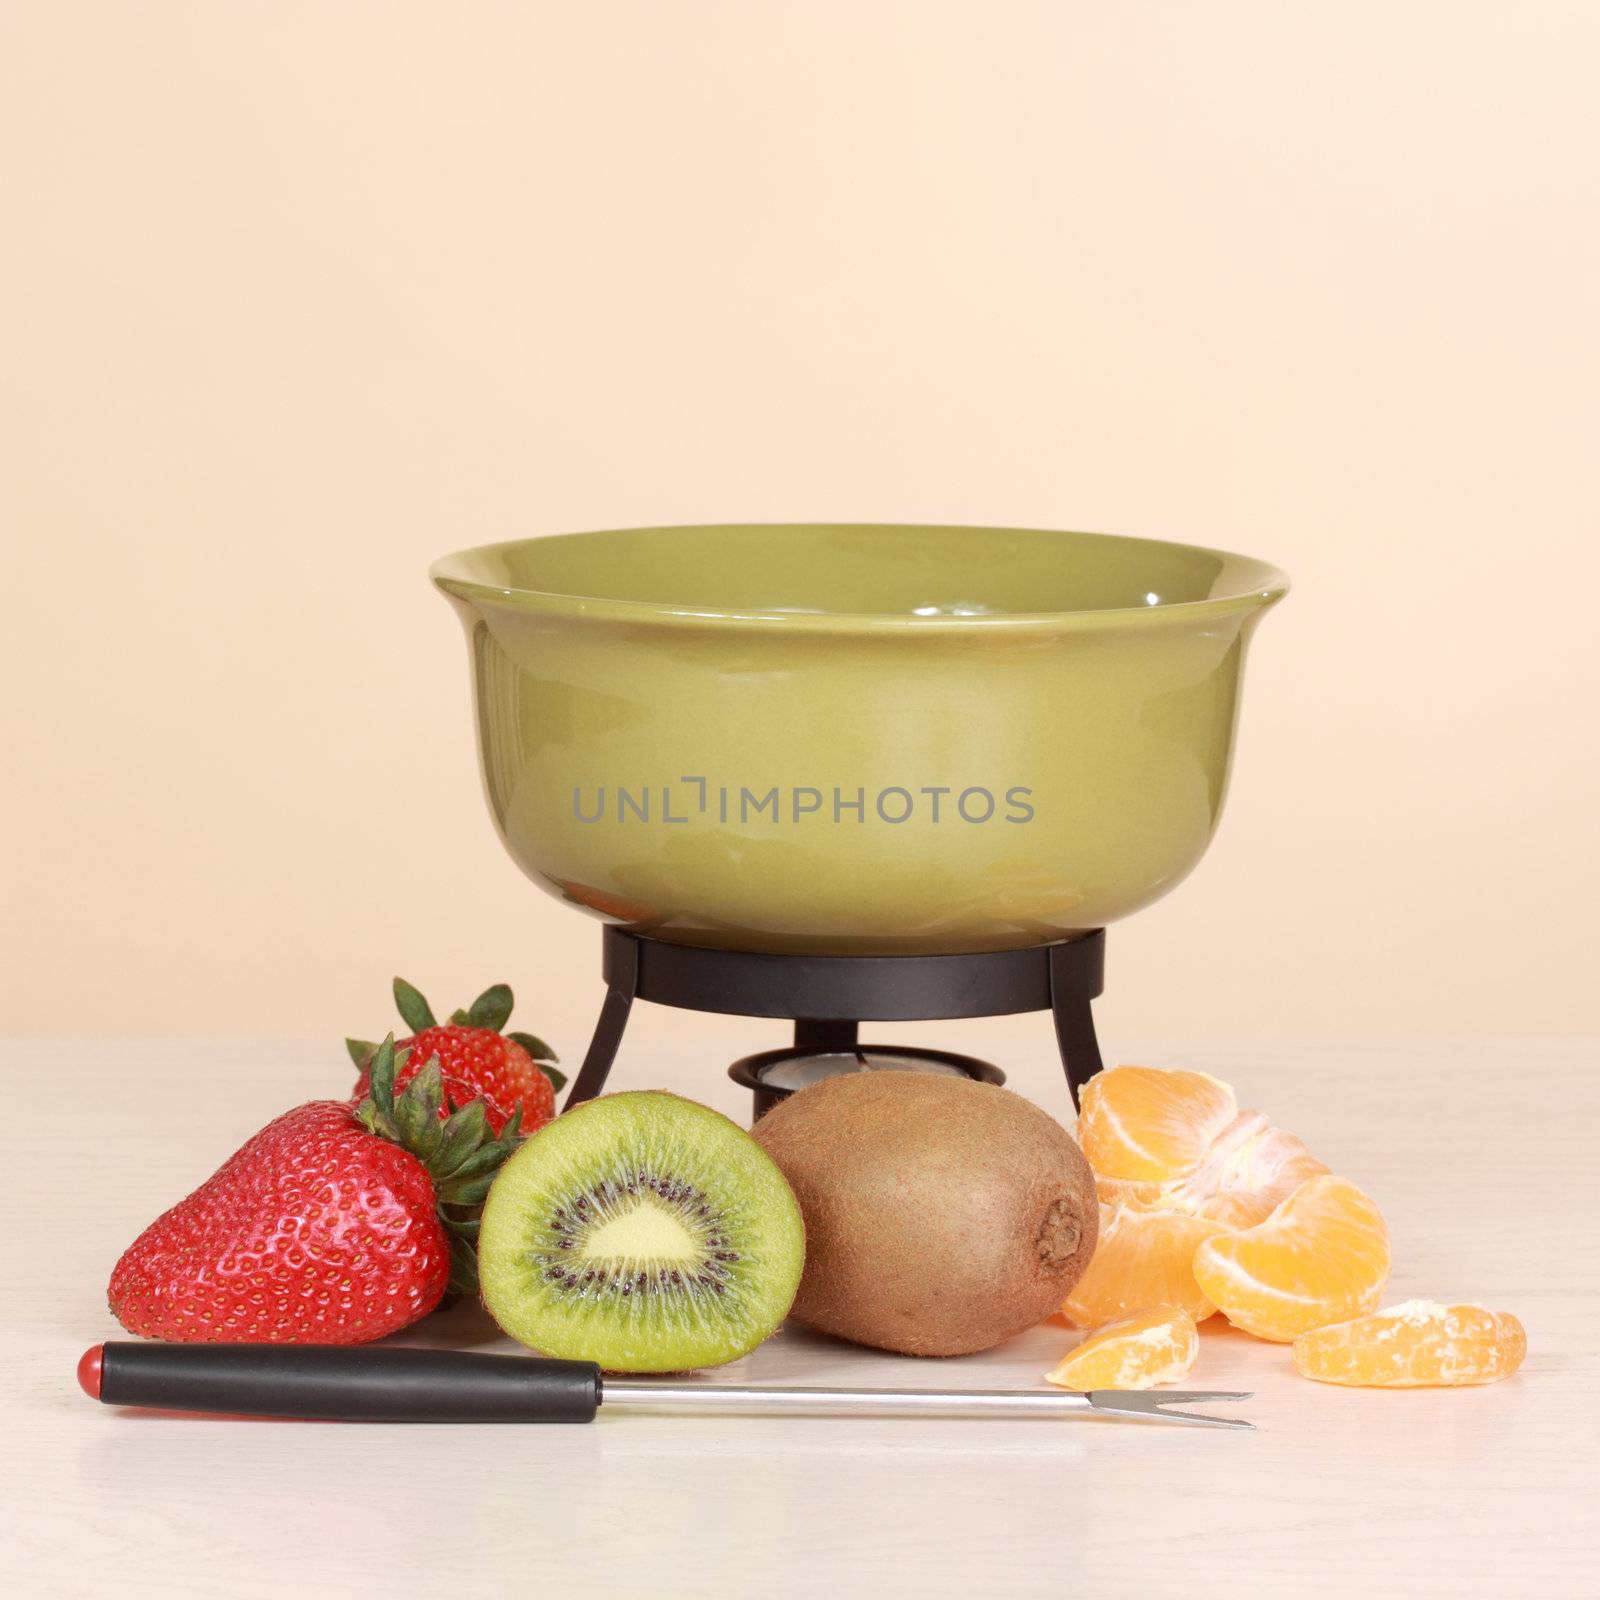 chocolate fondue kit and fruits by lanalanglois